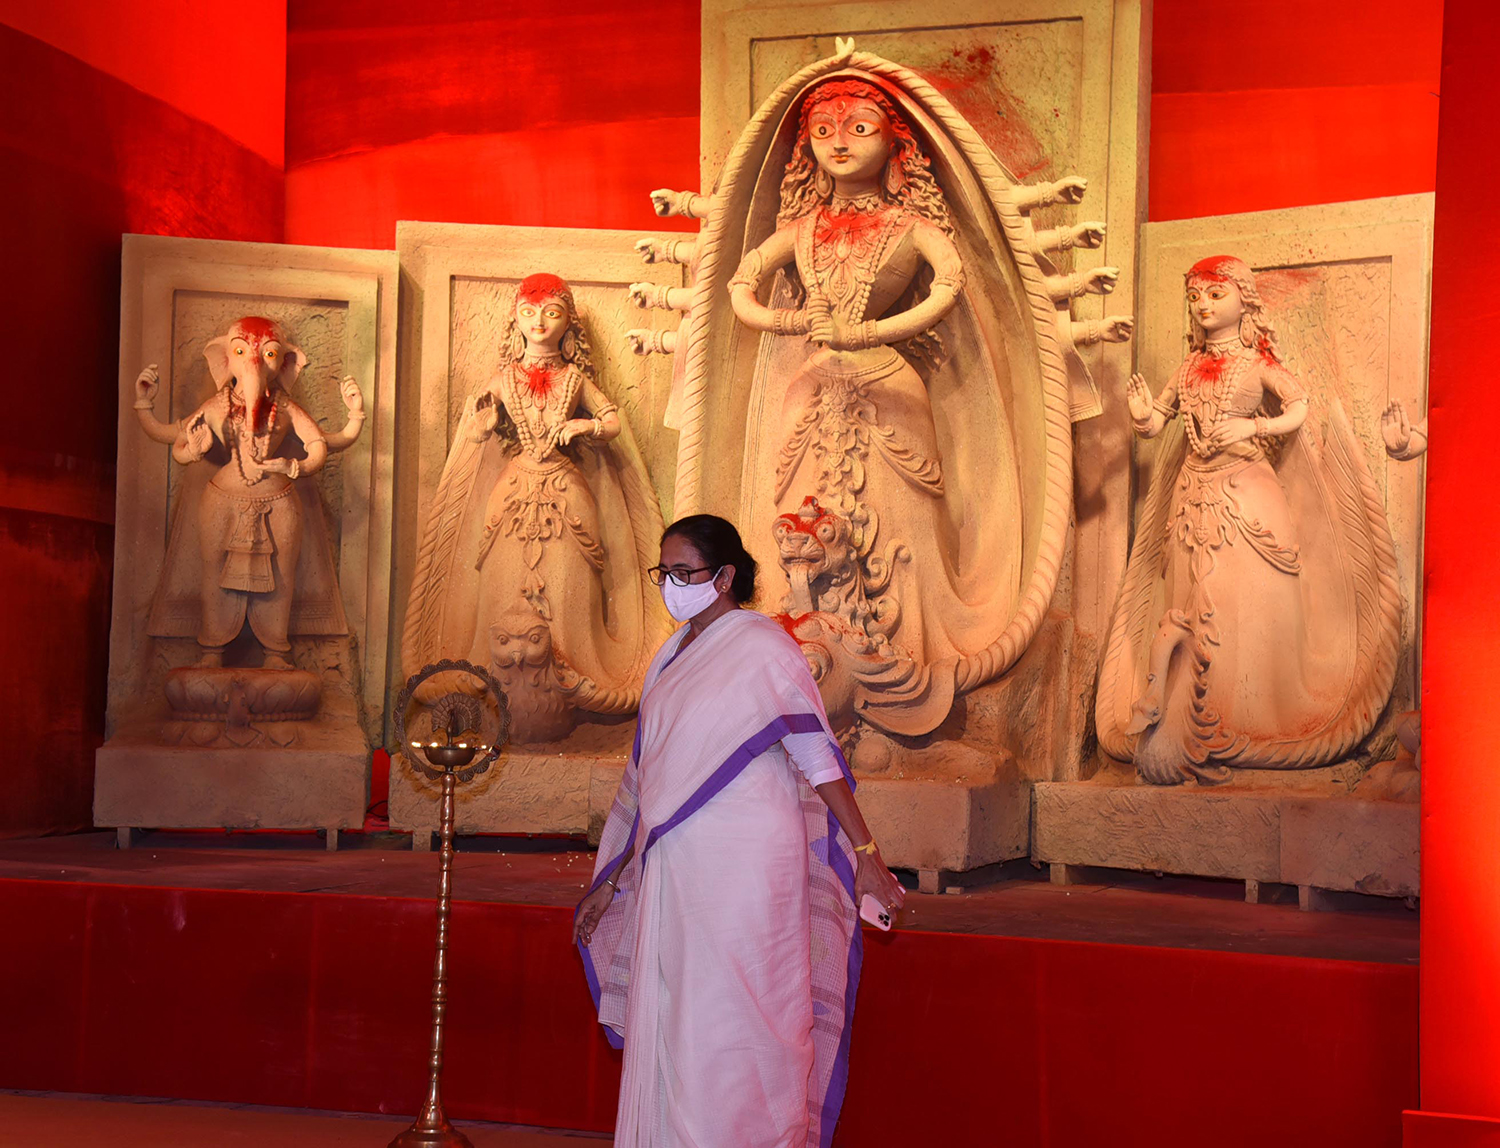 How West Bengal’s Durga Puja turned political during Mamata Banerjee’s rule